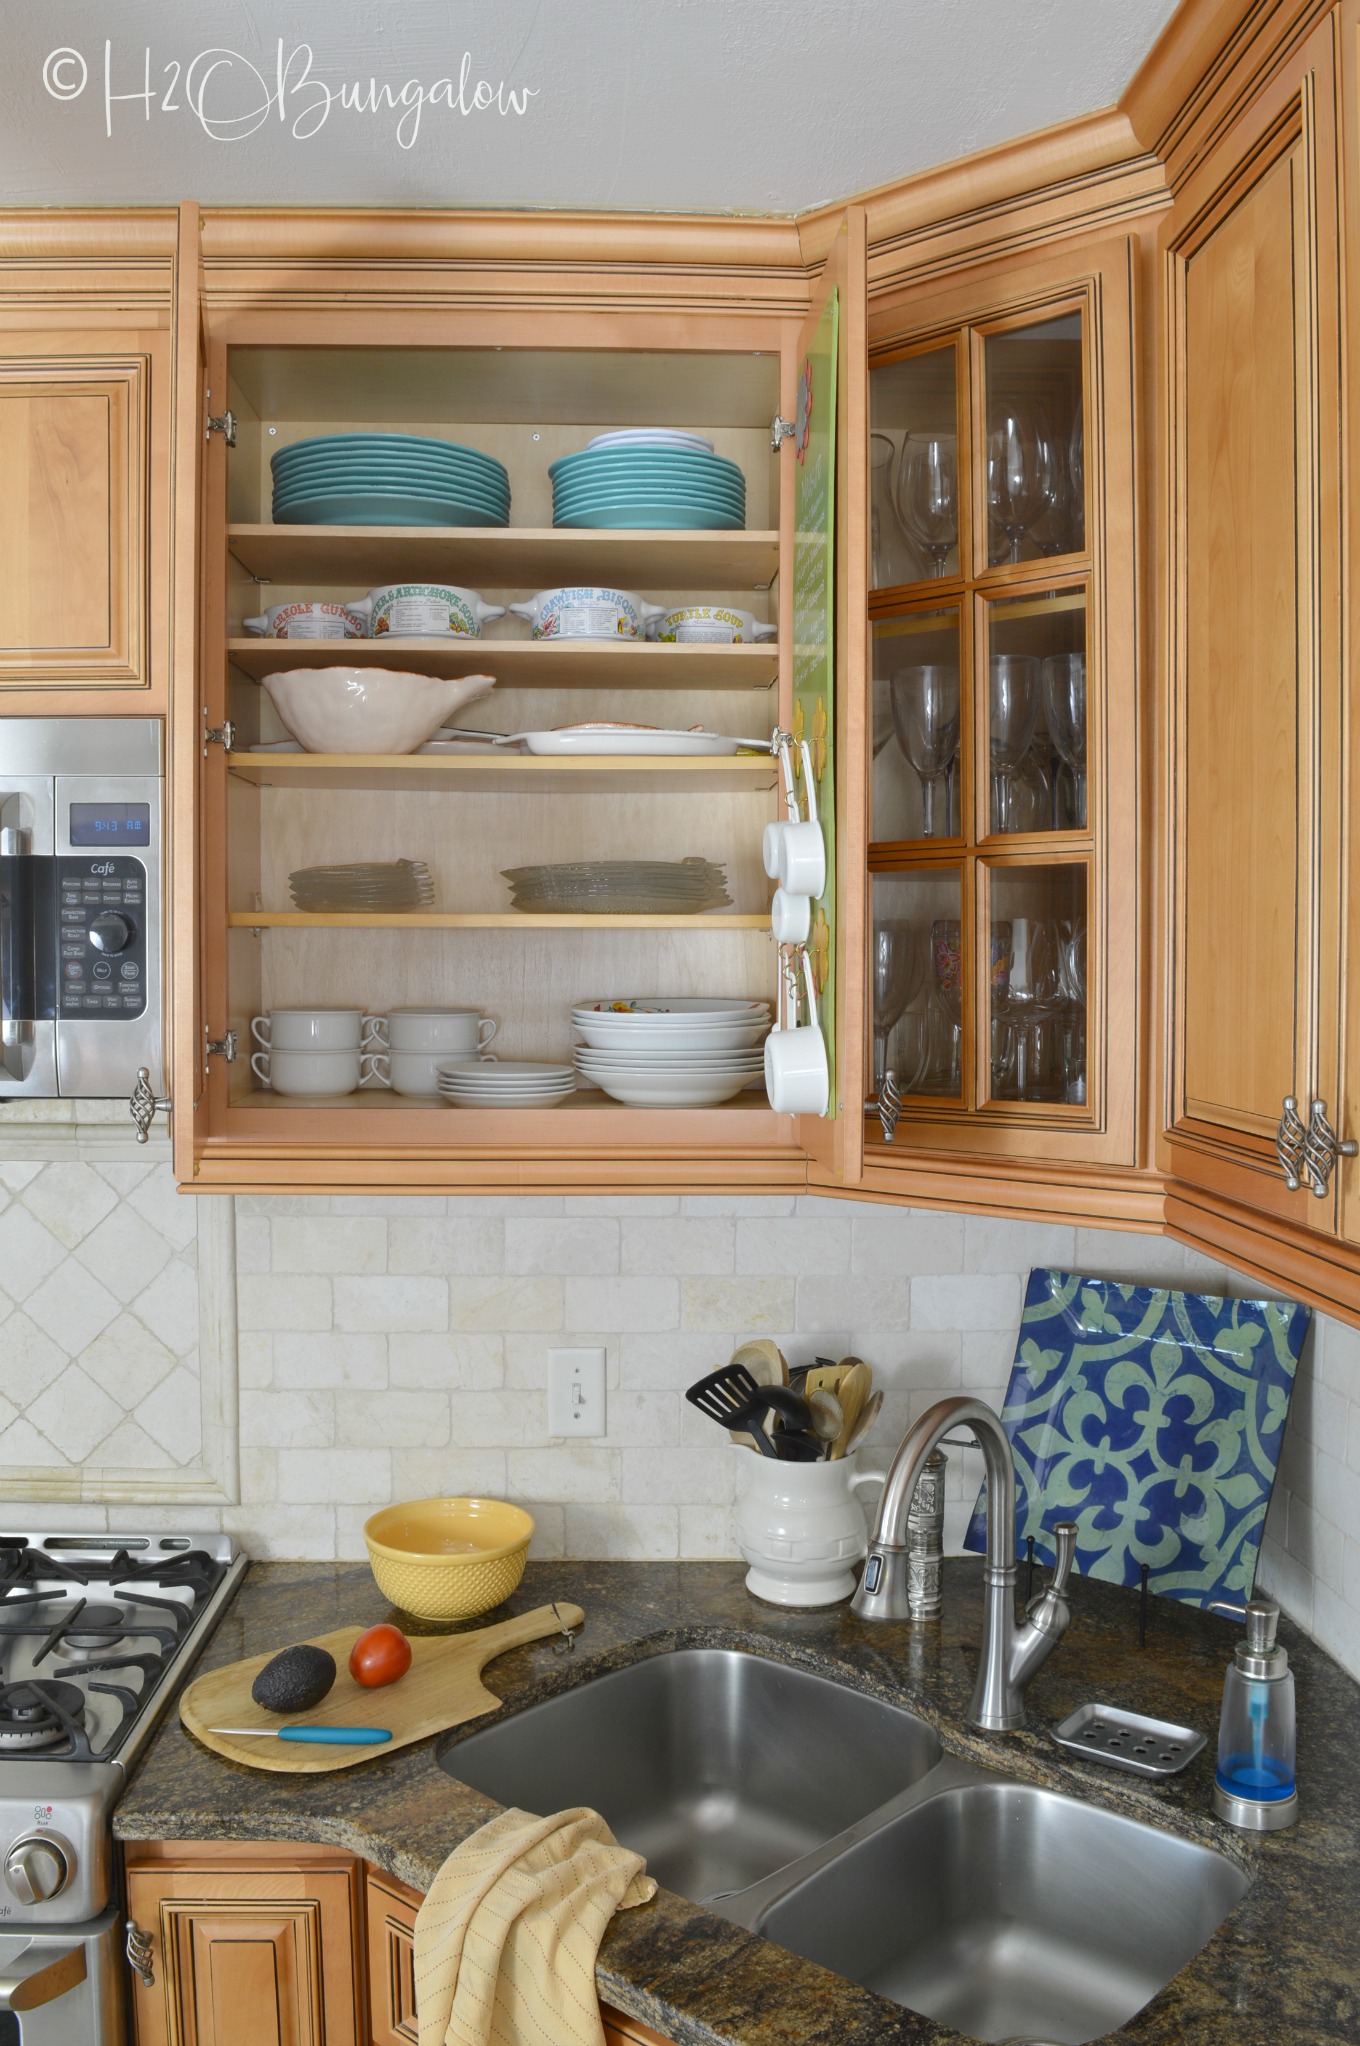 add extra shelves to kitchen cabinets and many more shelving ideas #shelves #storage